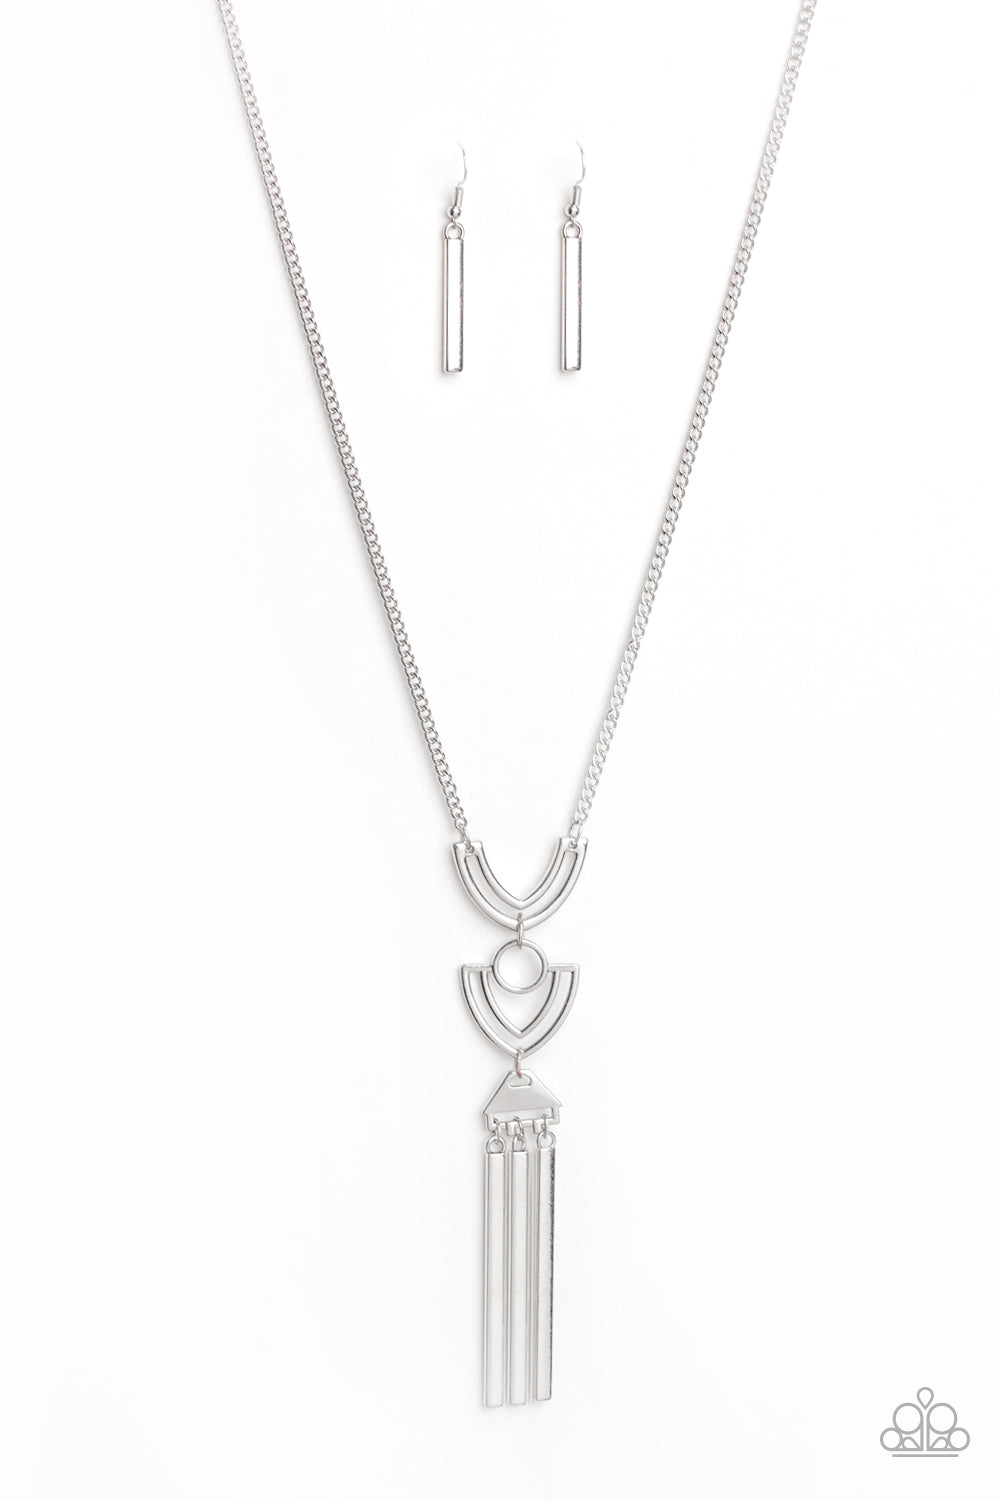 Confidently Cleopatra Silver Necklace - Paparazzi Accessories Item #JJG-N279 Two airy geometric silver frames link at the bottom of a lengthened silver chain, creating a stacked pendant. Rectangular bars swing from the bottom of the pendant, adding a bold movement to the tribal inspired piece. Features an adjustable clasp closure. All Paparazzi Accessories are lead free and nickel free!  Sold as one individual necklace. Includes one pair of matching earrings.